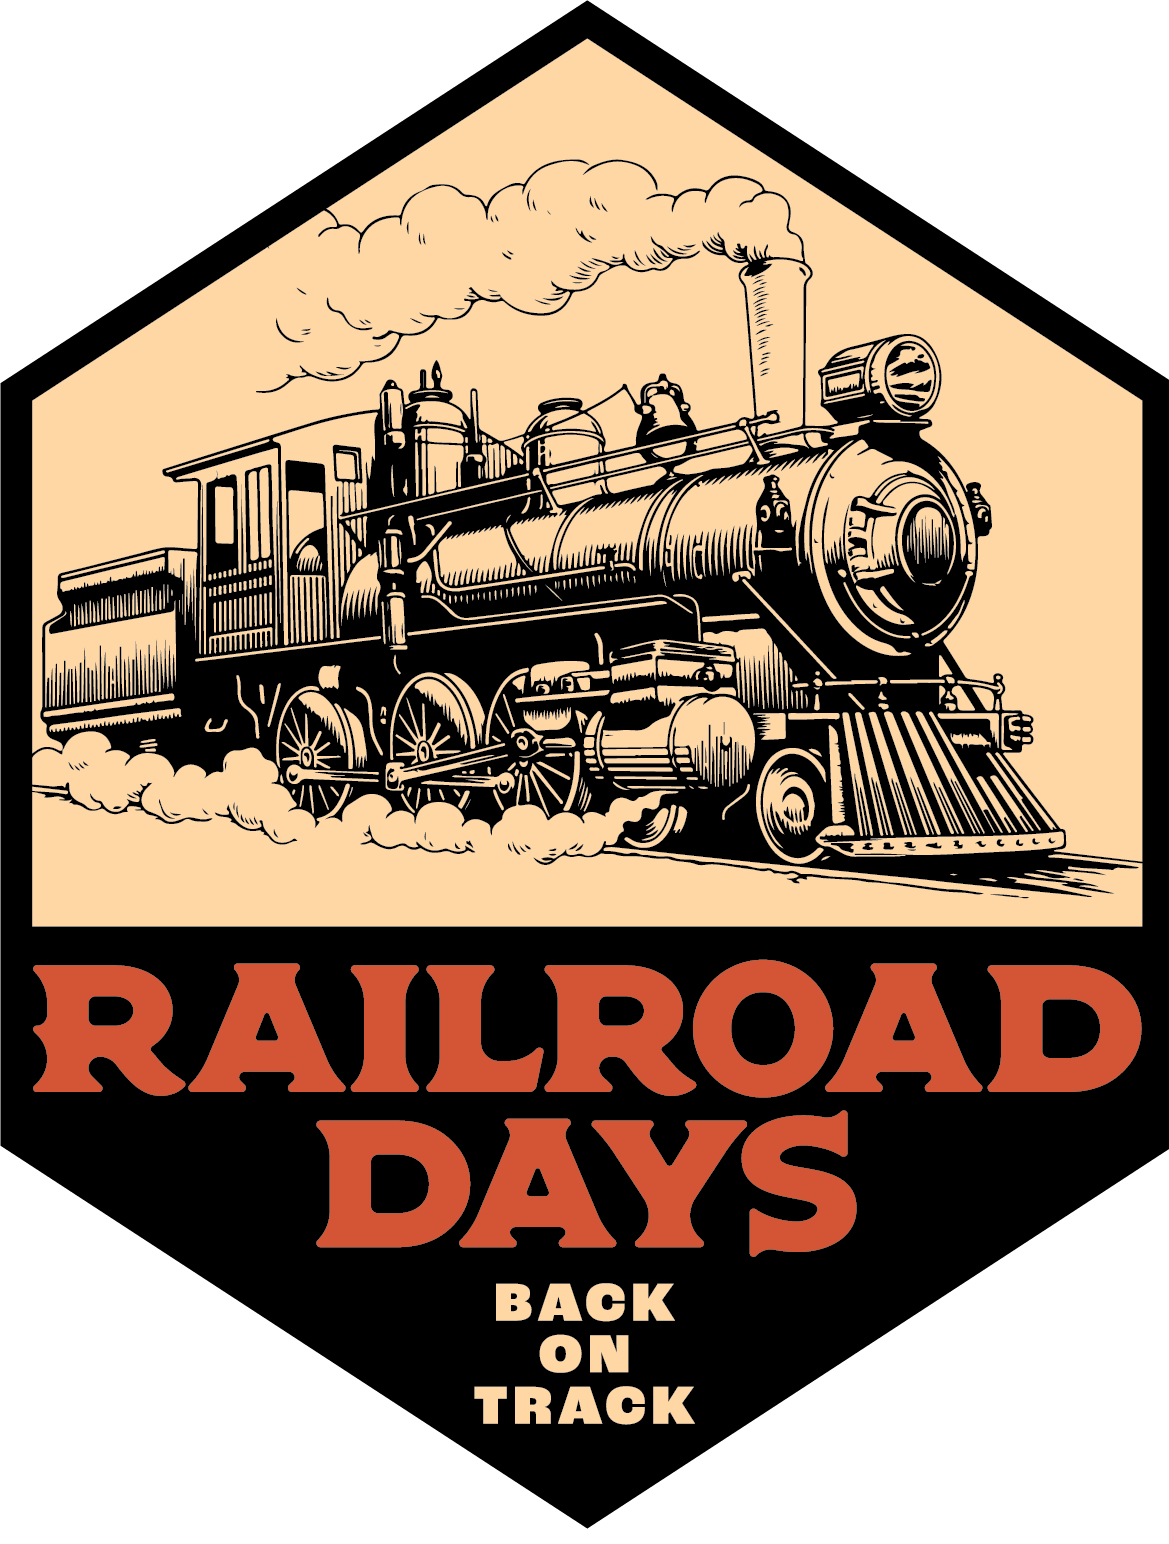 Railroad Days Granite Falls Chamber of Commerce Snohomish County